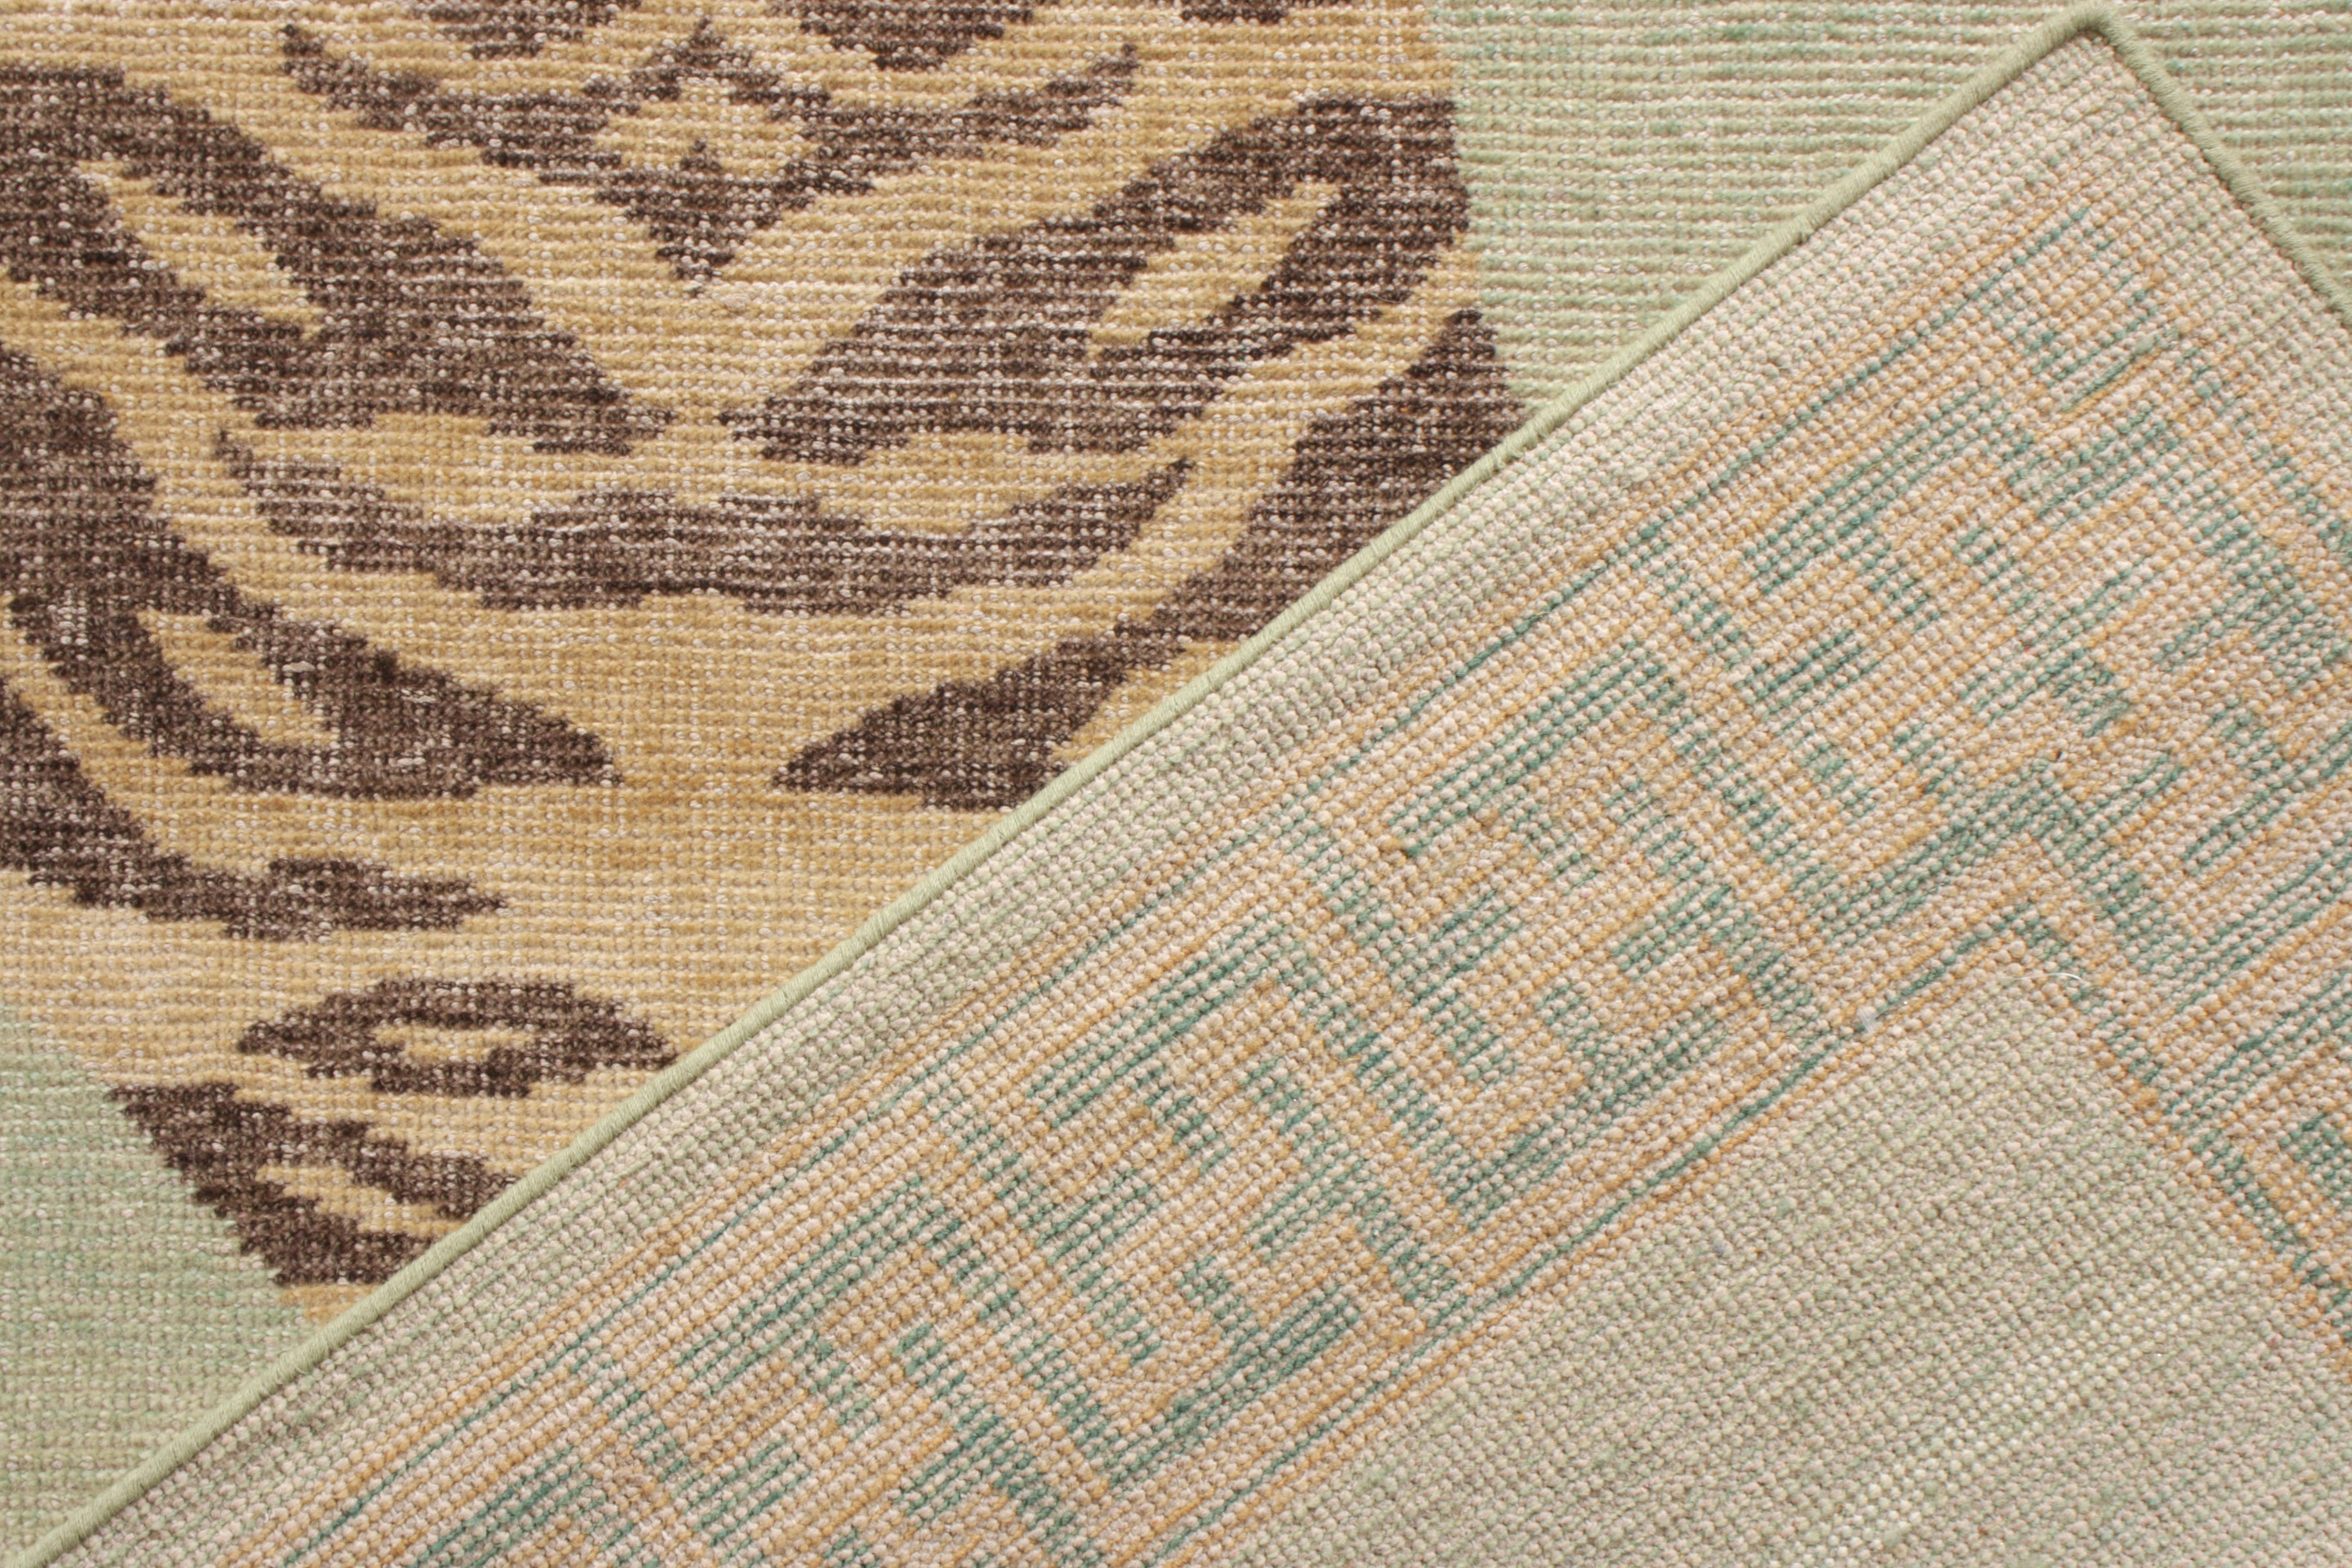 Indian Rug & Kilim’s Distressed Style Tiger Rug in Green, Beige-Brown Pictorial Pattern For Sale